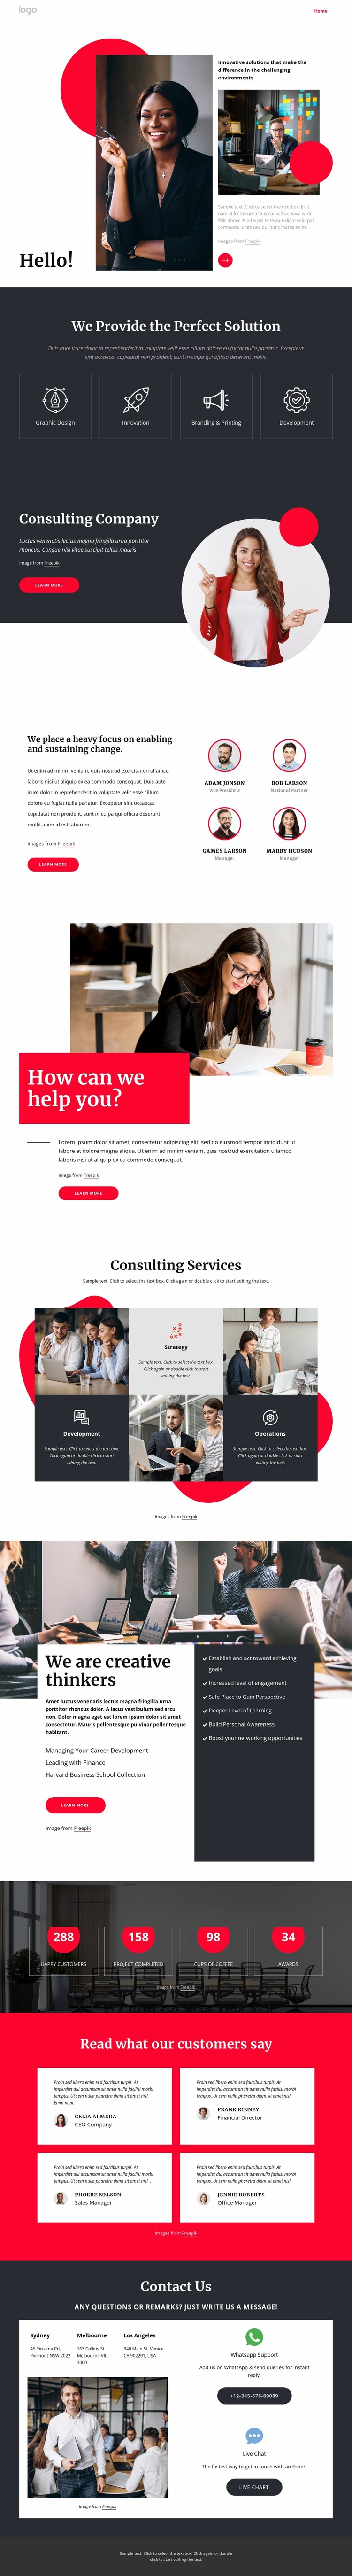 Consulting company NYC Html Website Builder